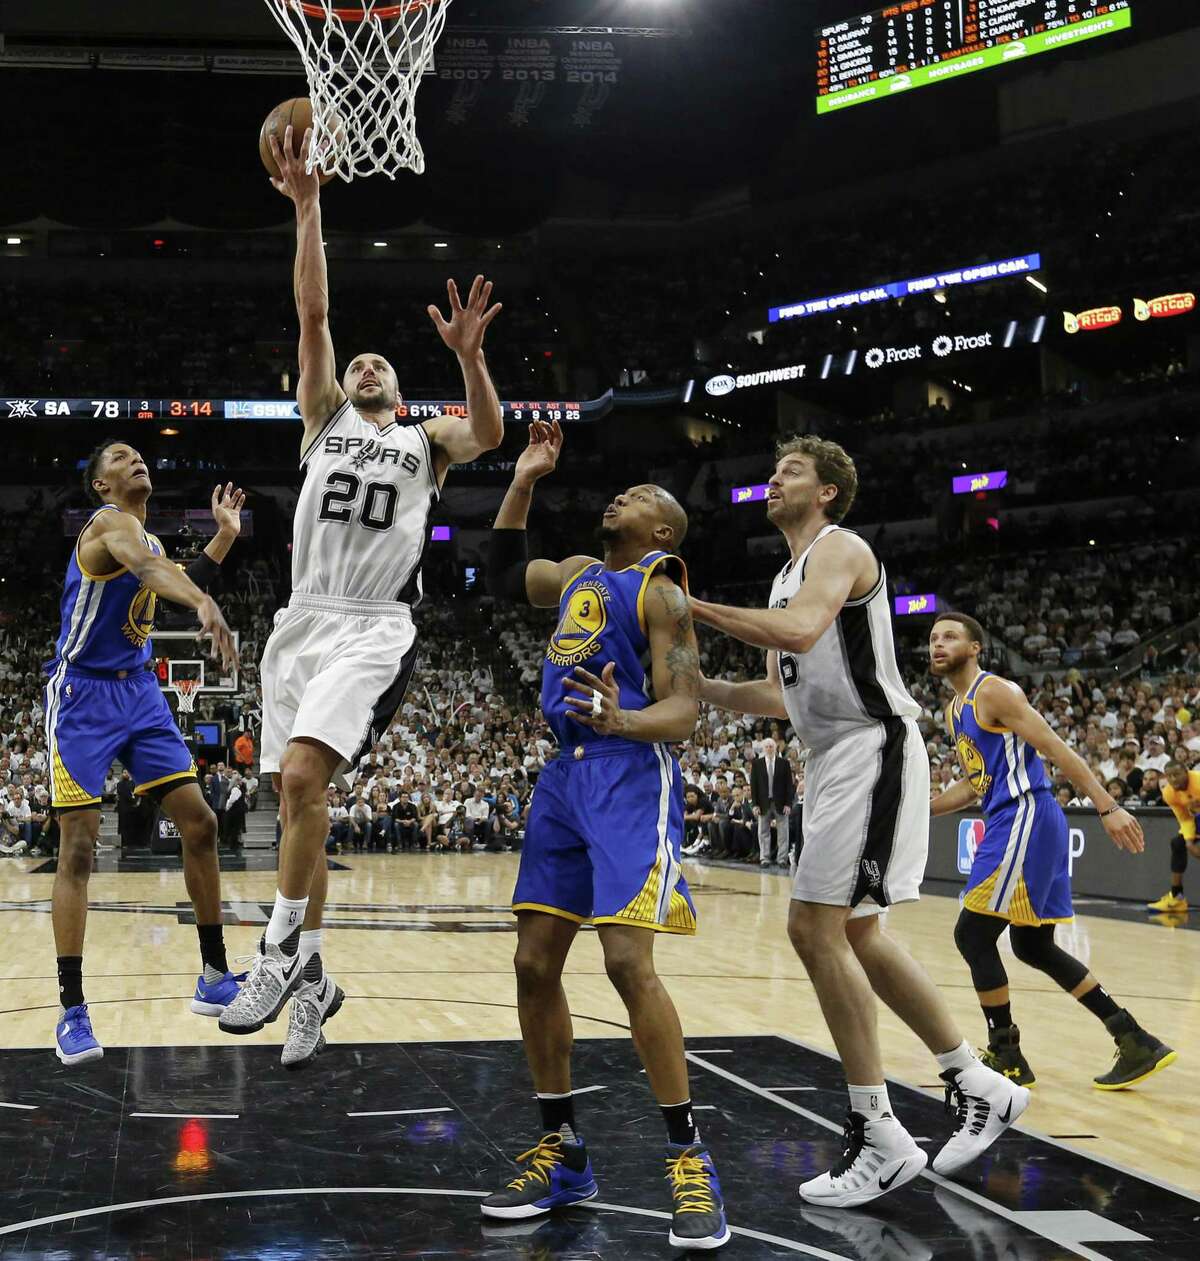 San Antonio Spurs' Manu Ginobili shoots between Golden State Warriors' Patrick McCaw (left) and David West as San Antonio Spurs' Pau Gasol and Golden State Warriors' Stephen Curry look on during second half action in Game 3 of the Western Conference Finals held Saturday May 20, 2017 at the AT&T Center. The Warriors won 120-108.